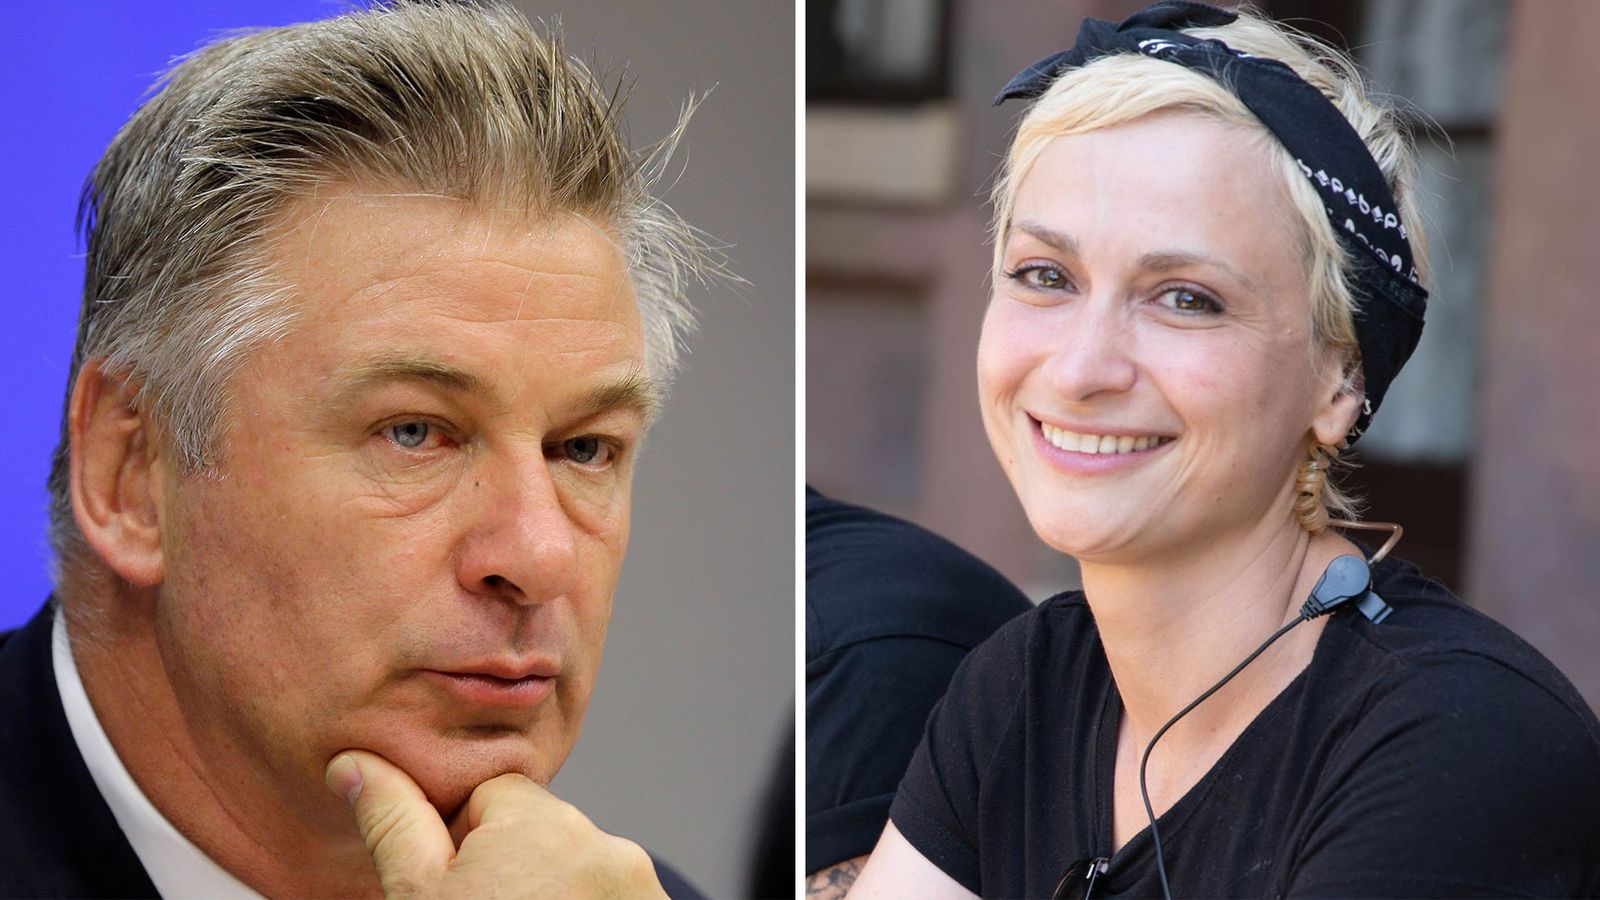 Alec Baldwin: All criminal charges against actor over fatal shooting on Rust set are dropped